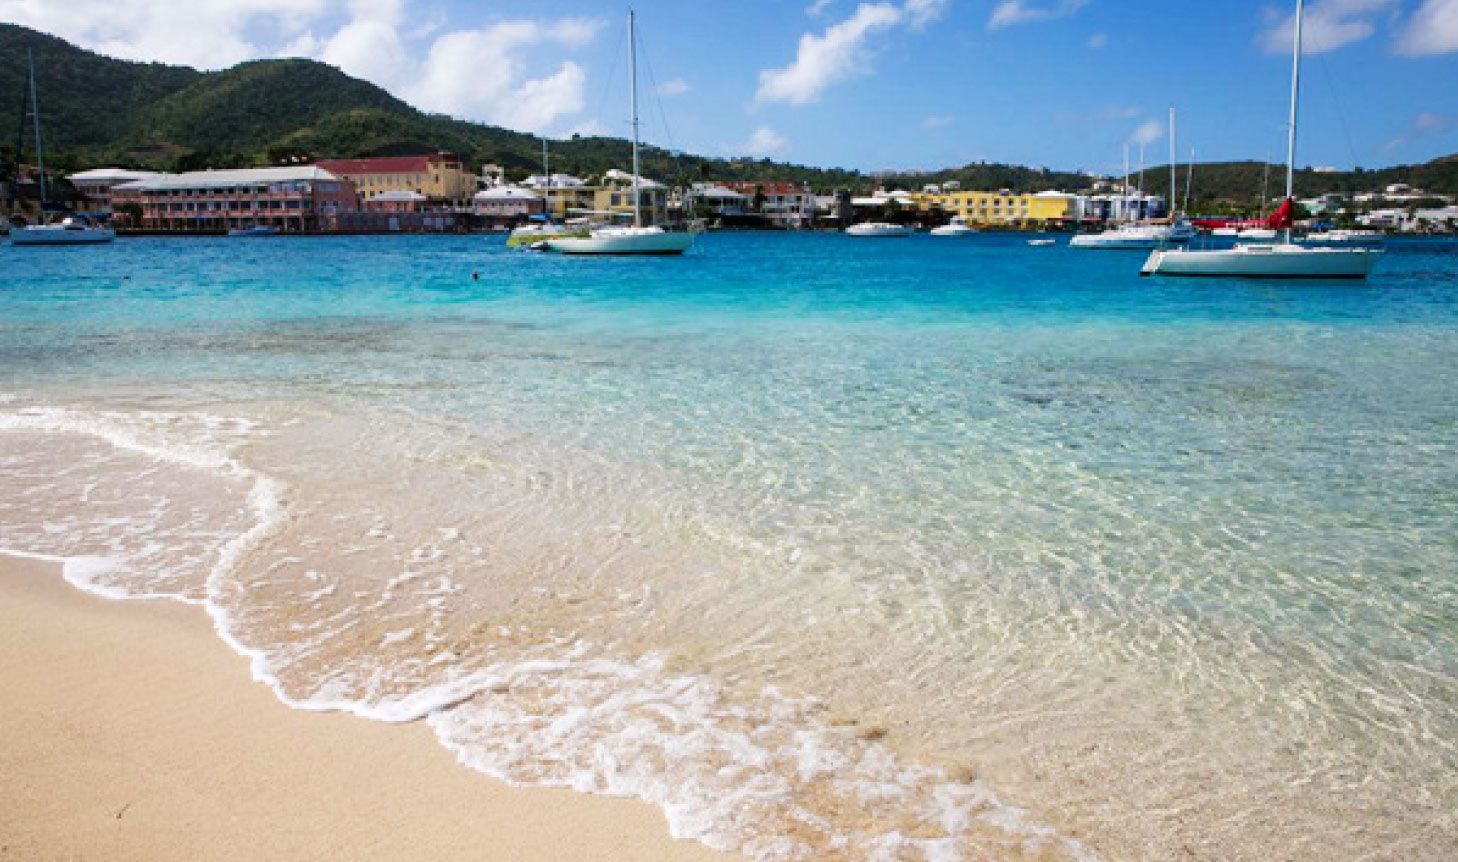 USVI Named Caribbean Destination of the Year - St. Lucia News From The ...